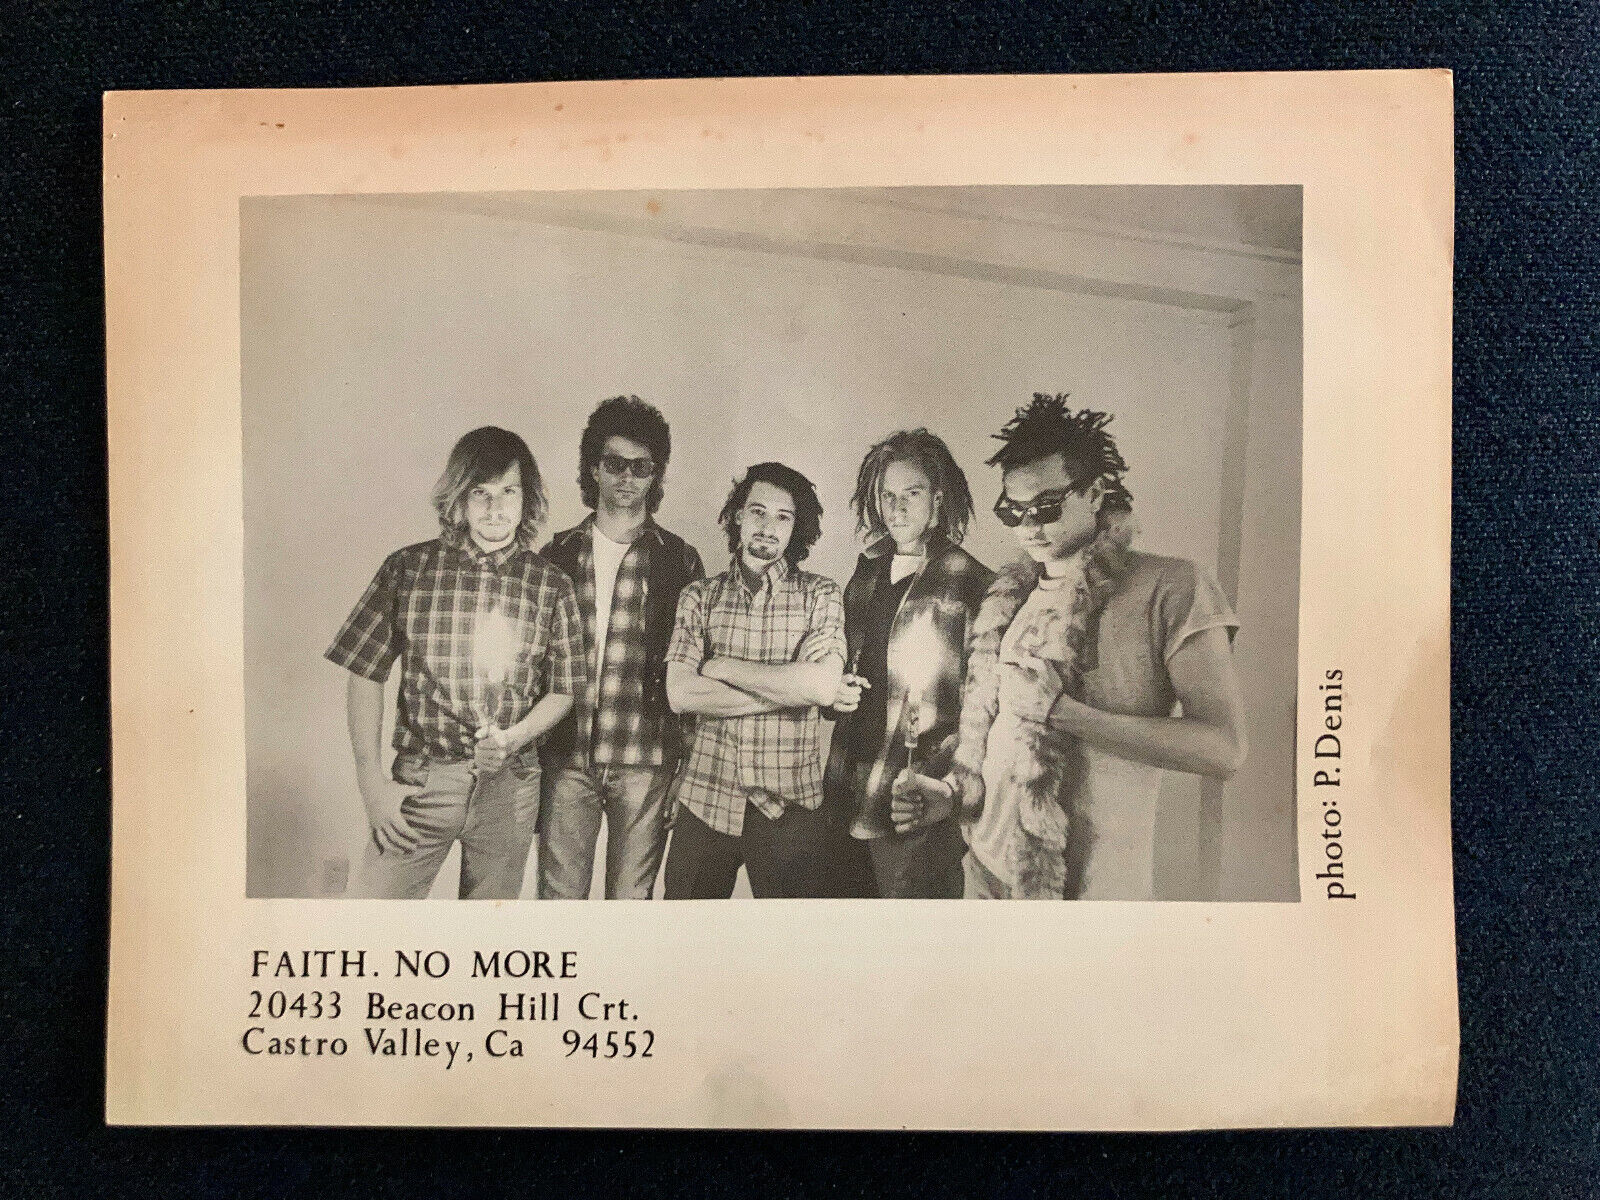 FAITH NO MORE Promo Photo VERY EARLY 1980s We Care A Lot FNM Mike Patton